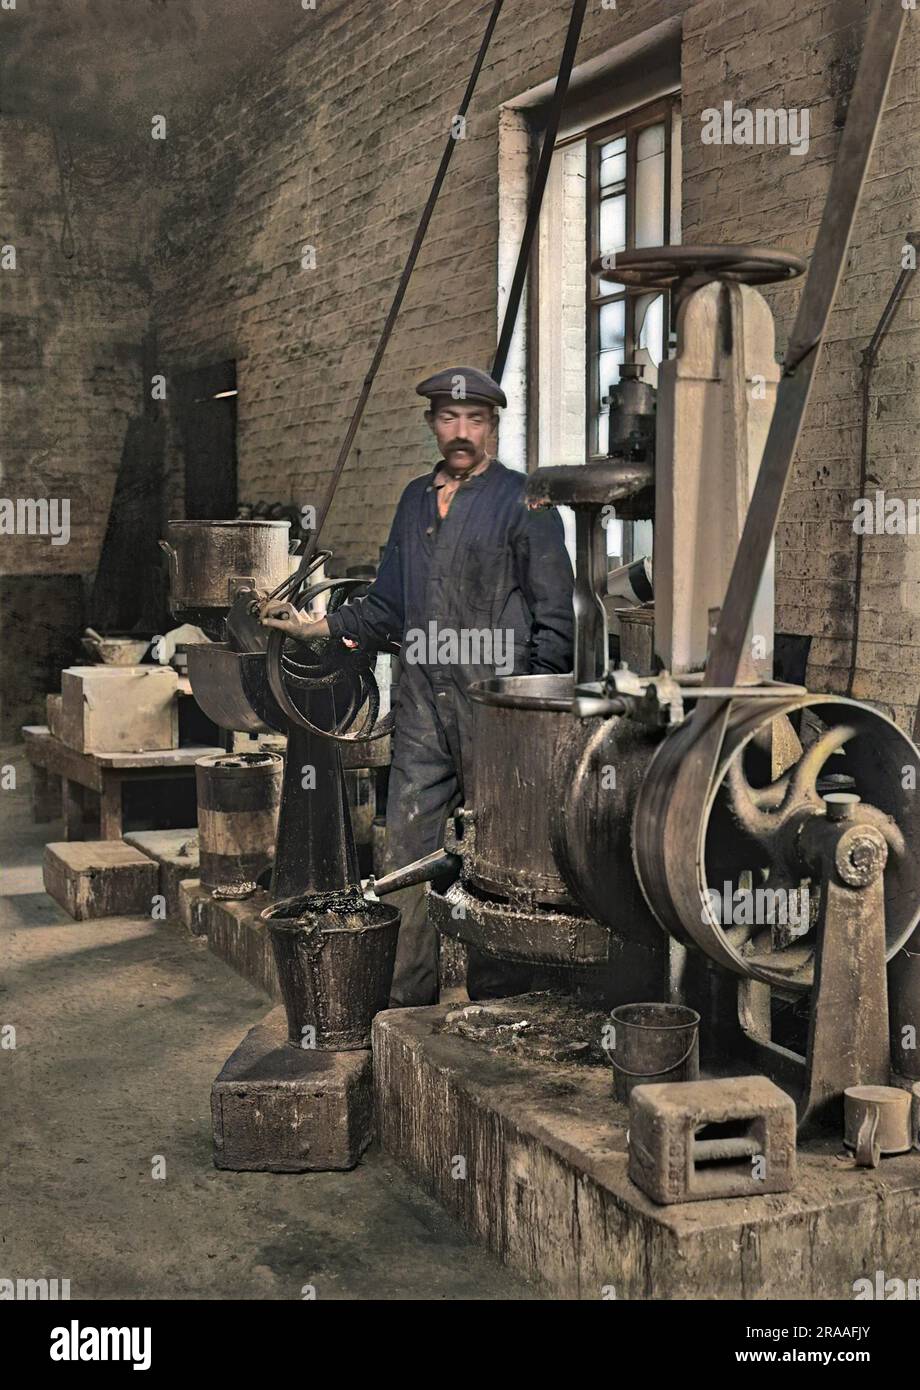 Workman in a factory operating machinery. The factory produced lead shrapnel for the use in high explosive artillery shells during WW1.     Date: circa 1915 Stock Photo